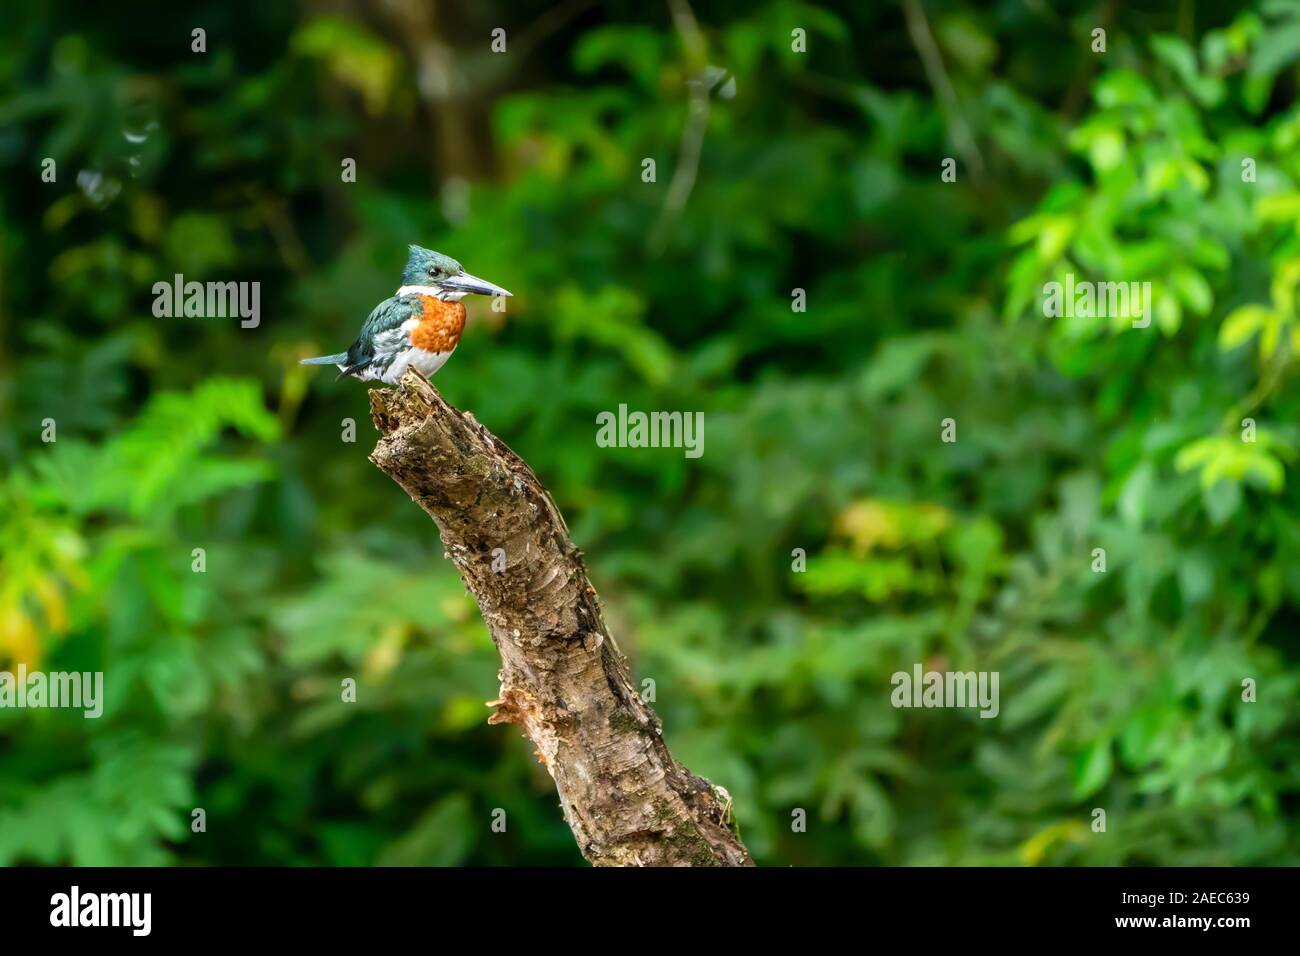 Ringed kingfisher (Megaceryle torquata) perching in a tree. This kingfisher inhabits wetlands in South America, perching above lakes and slow-moving r Stock Photo